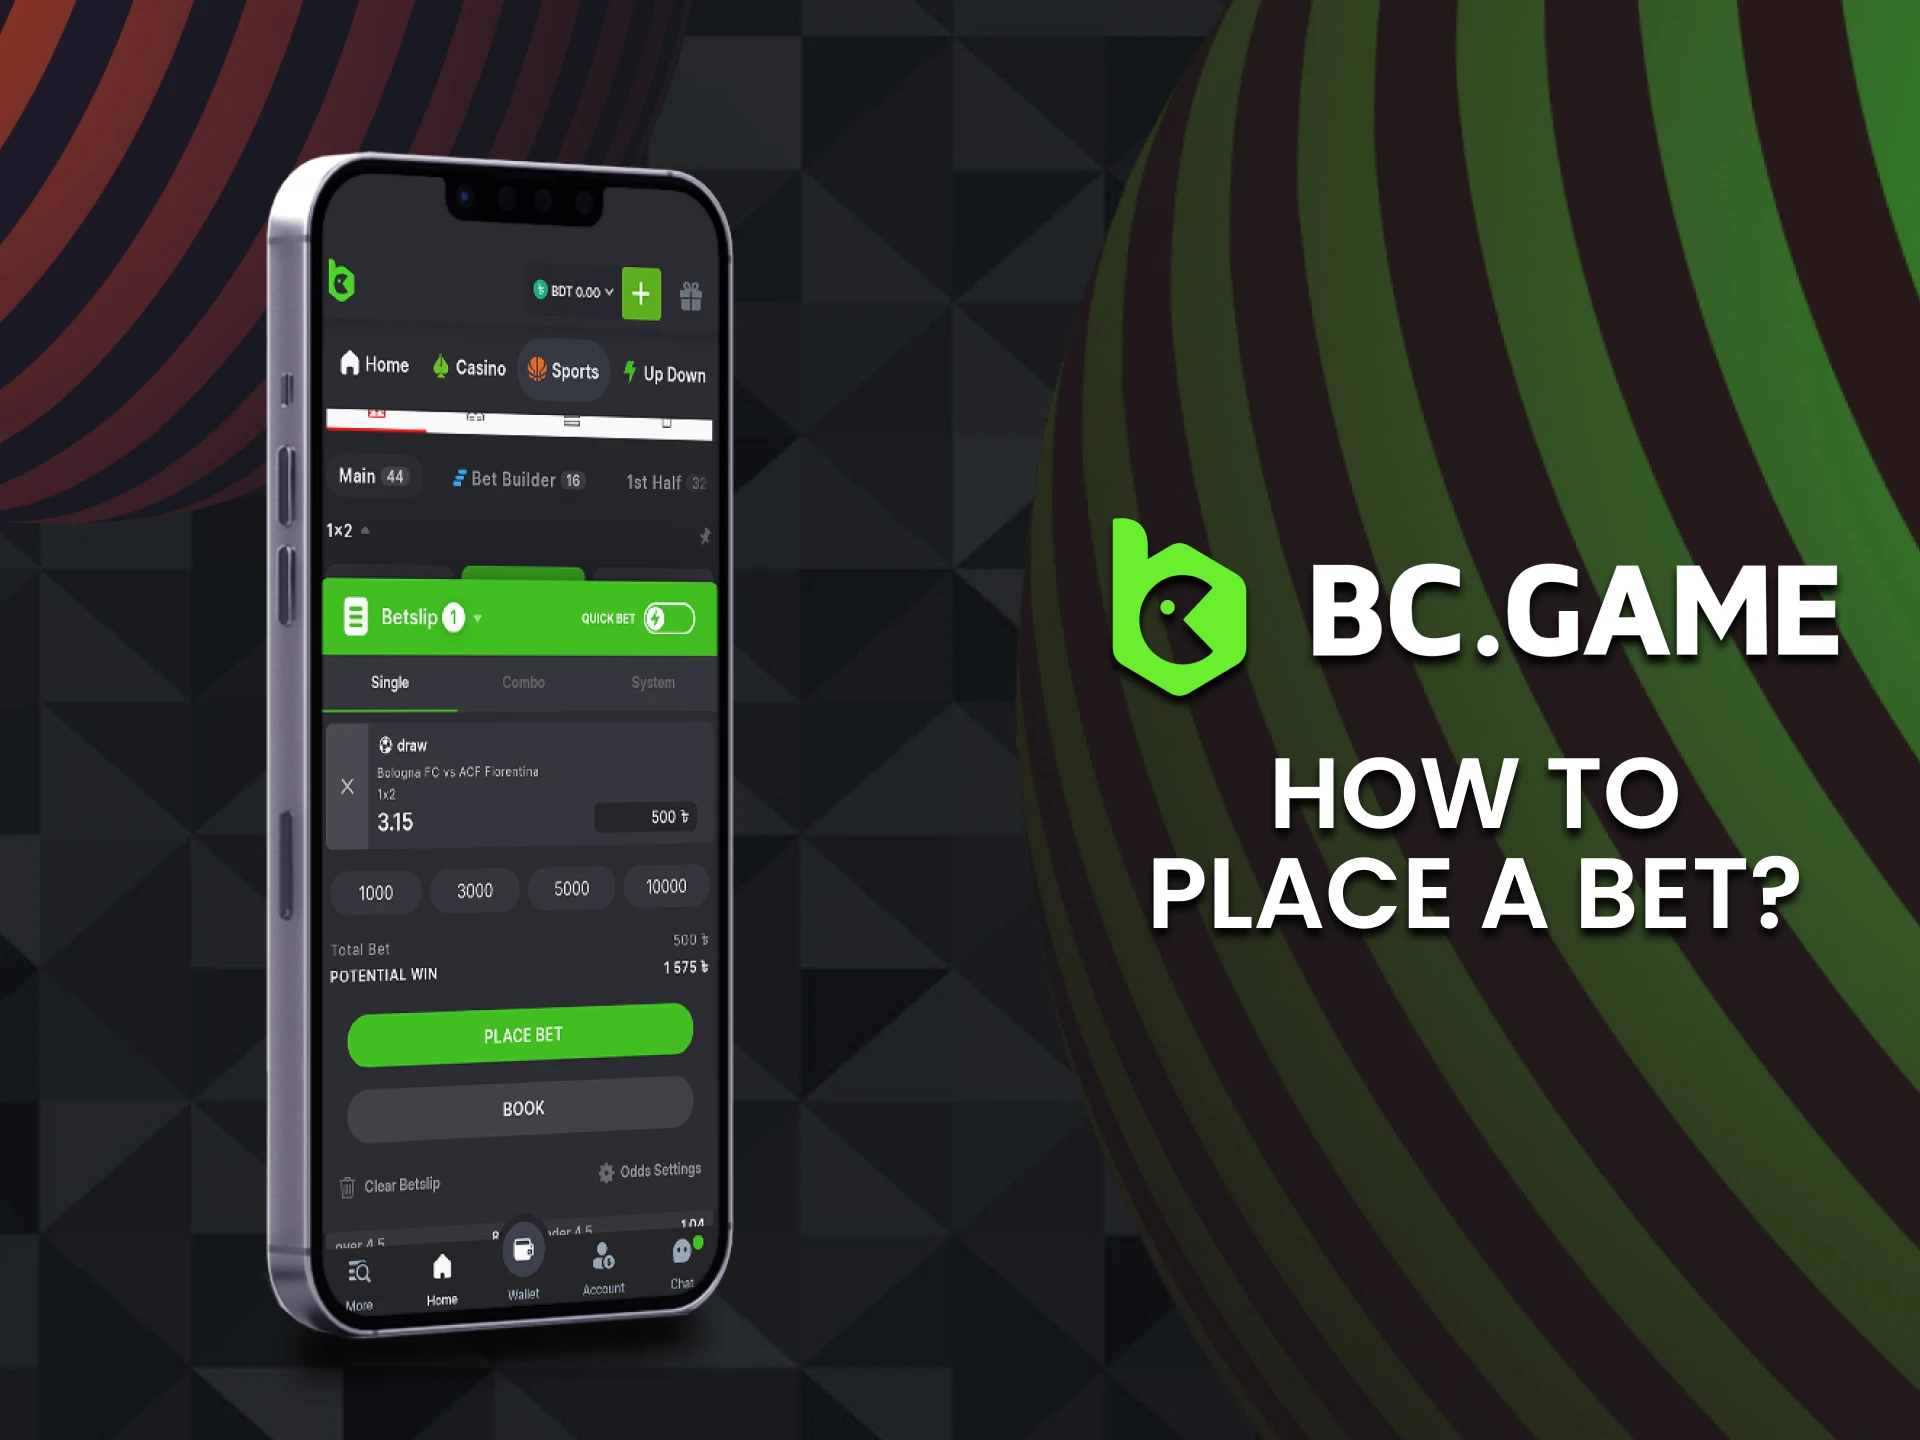 Place a bet in the BC Game mobile app in 4 simple steps.